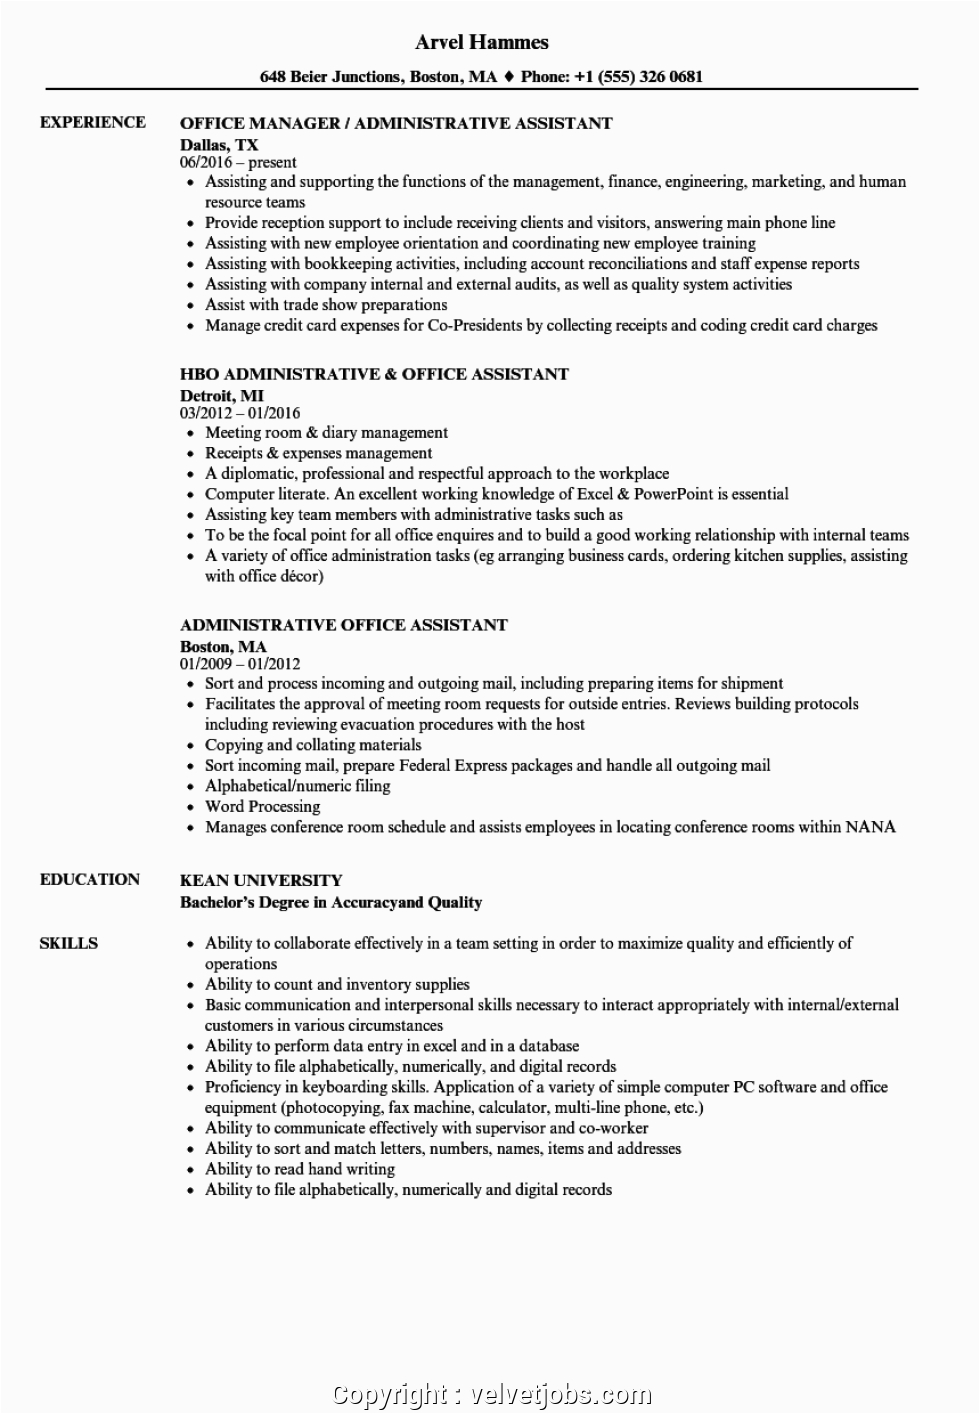 Resume Sample for Office assistant Position Styles Fice assistant Resume Sample Administrative